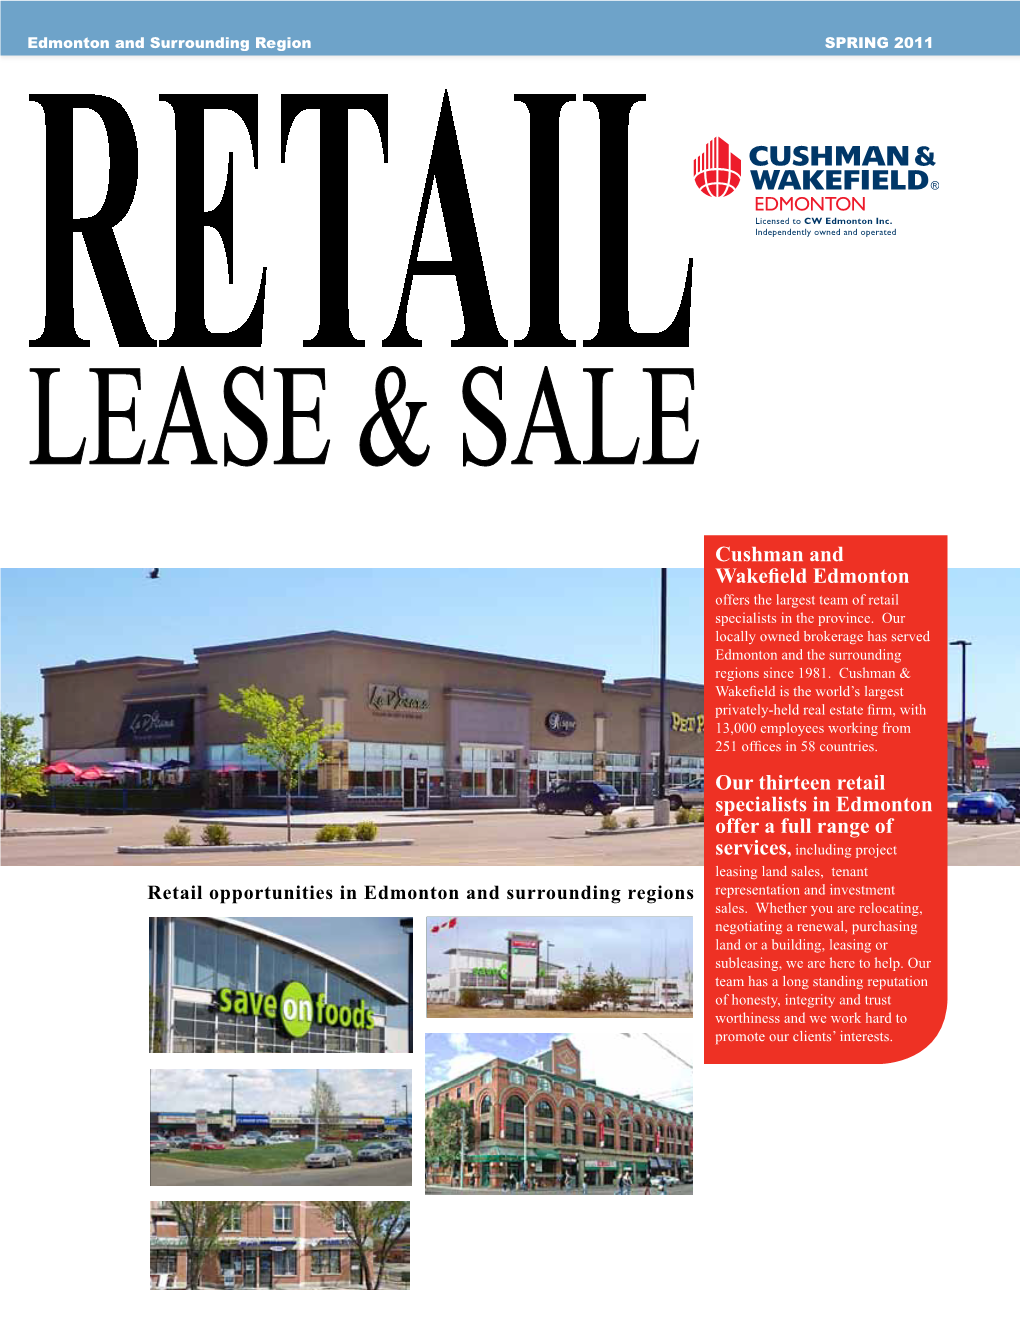 Cushman and Wakefield Edmonton Our Thirteen Retail Specialists In